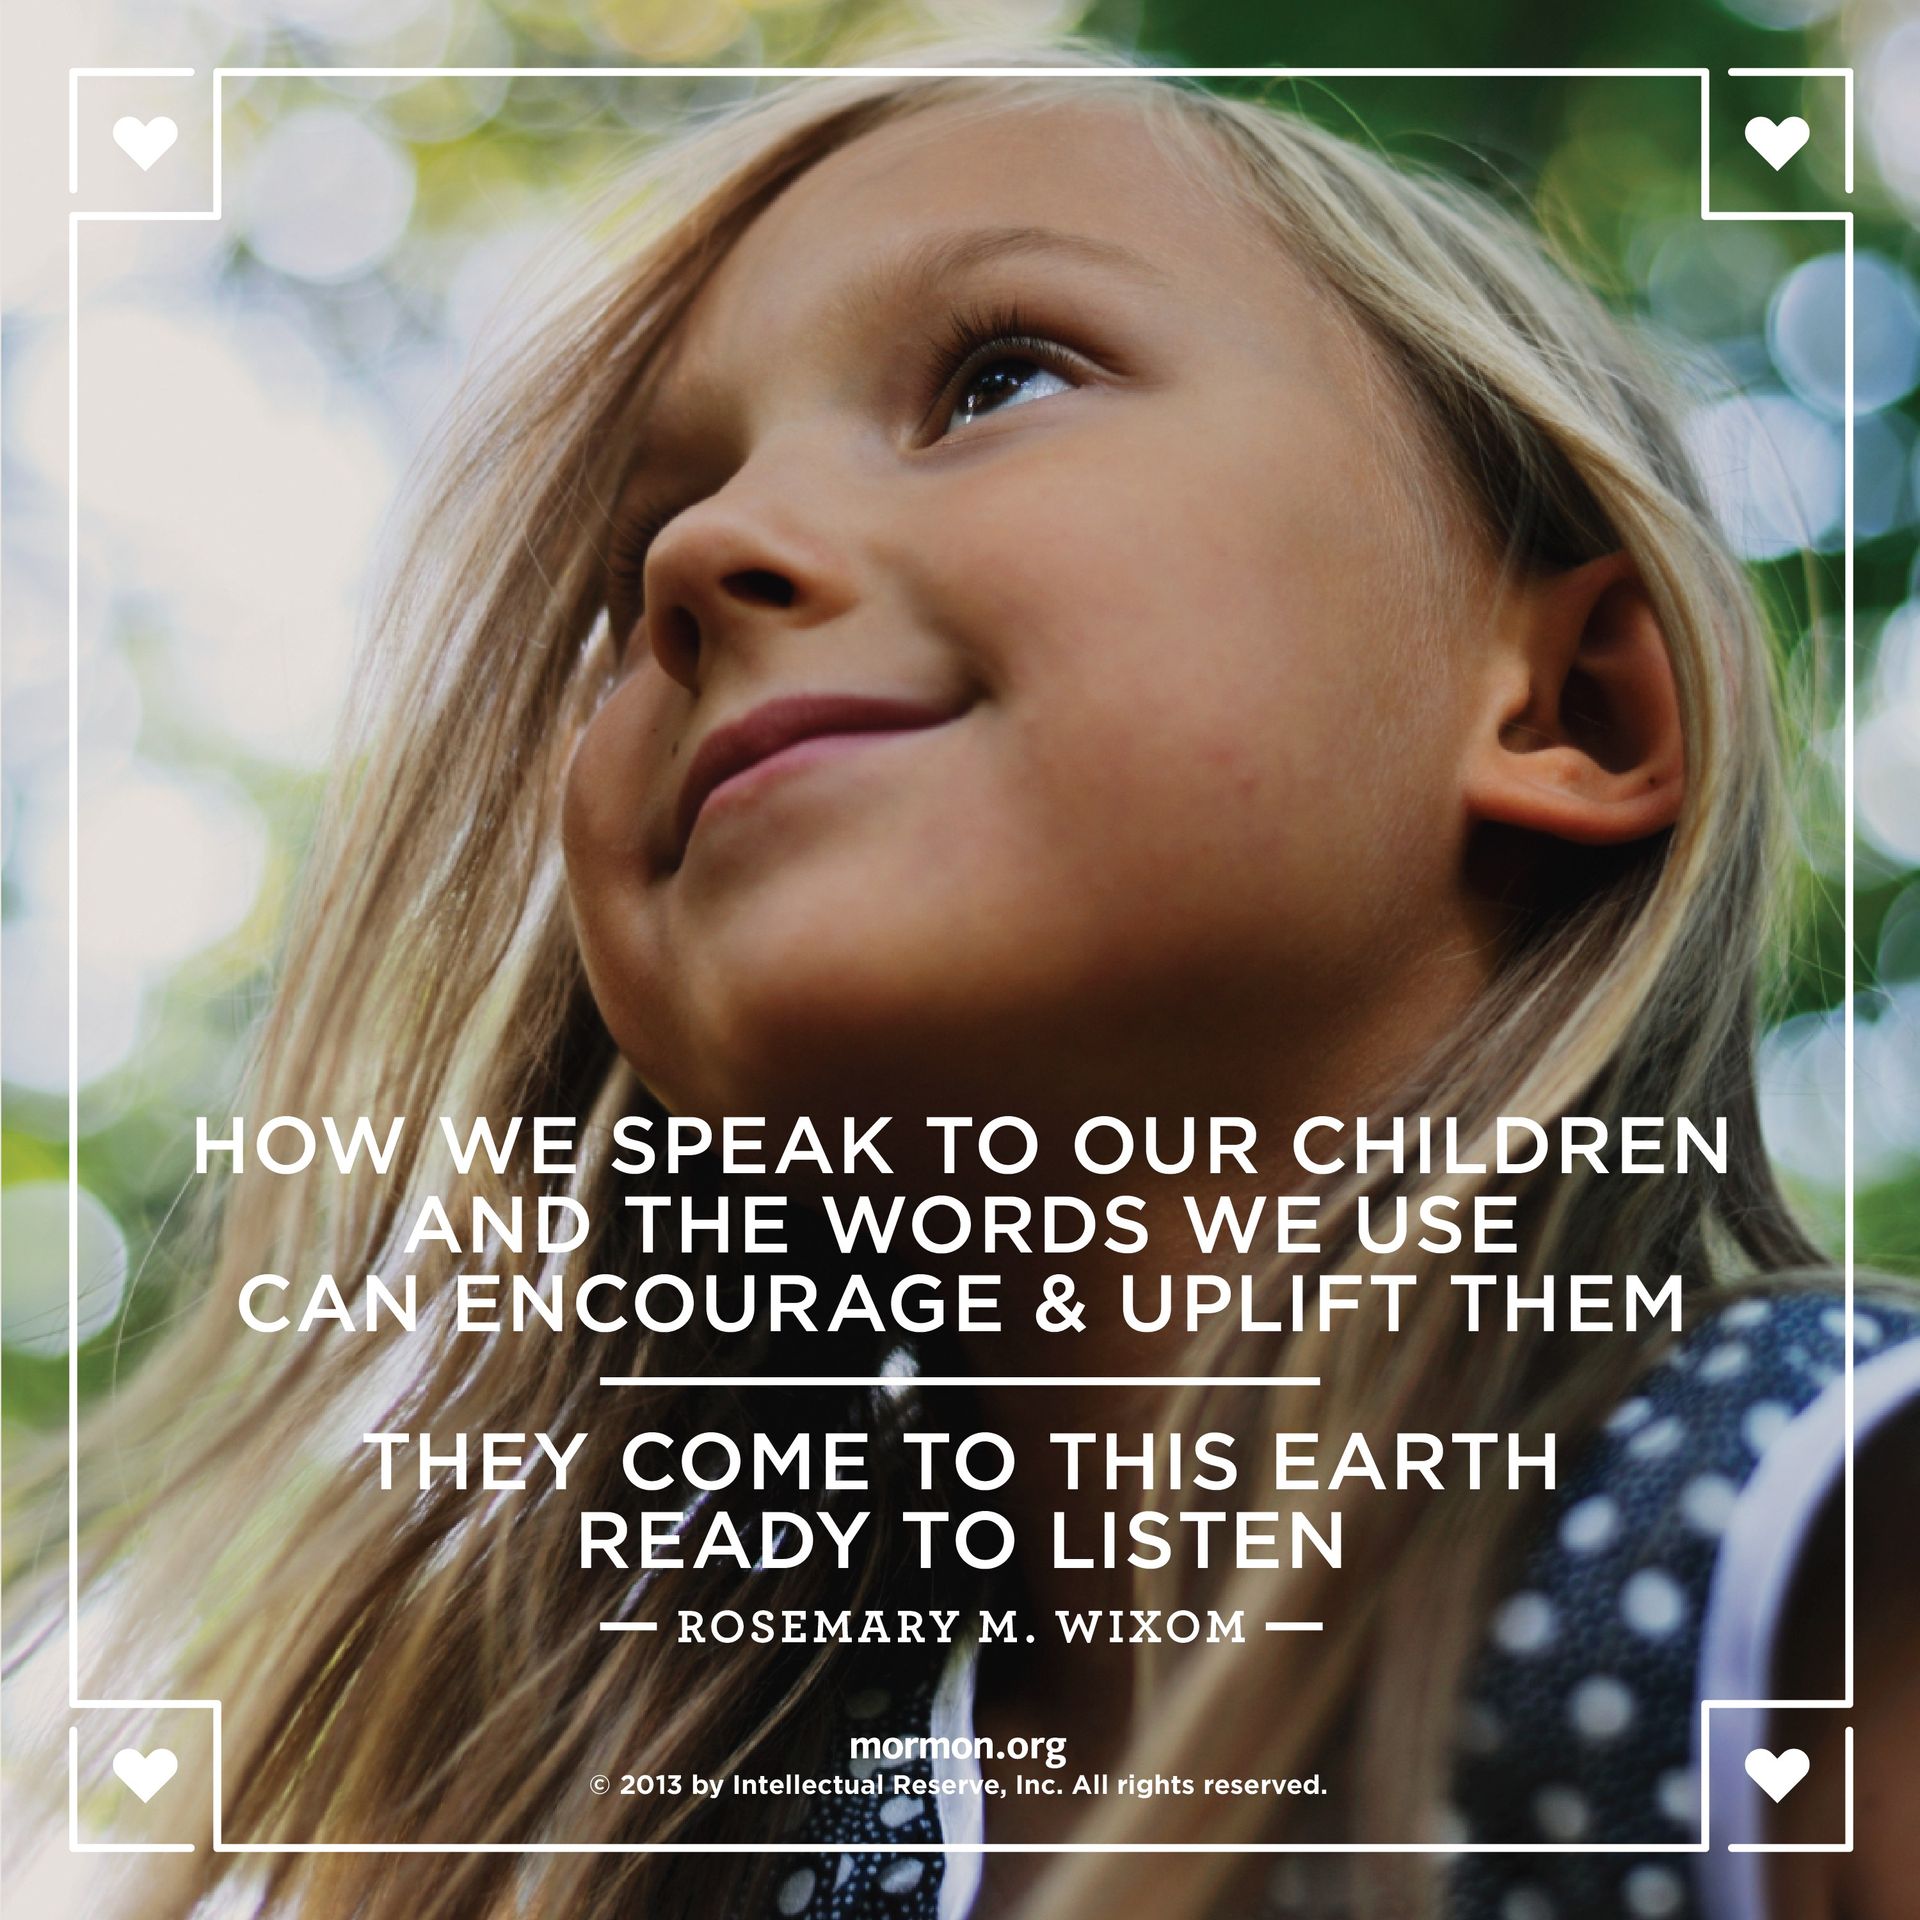 “How we speak to our children and the words we use can encourage and uplift them. They come to this earth ready to listen.”—Sister Rosemary M. Wixom, “The Words We Speak”